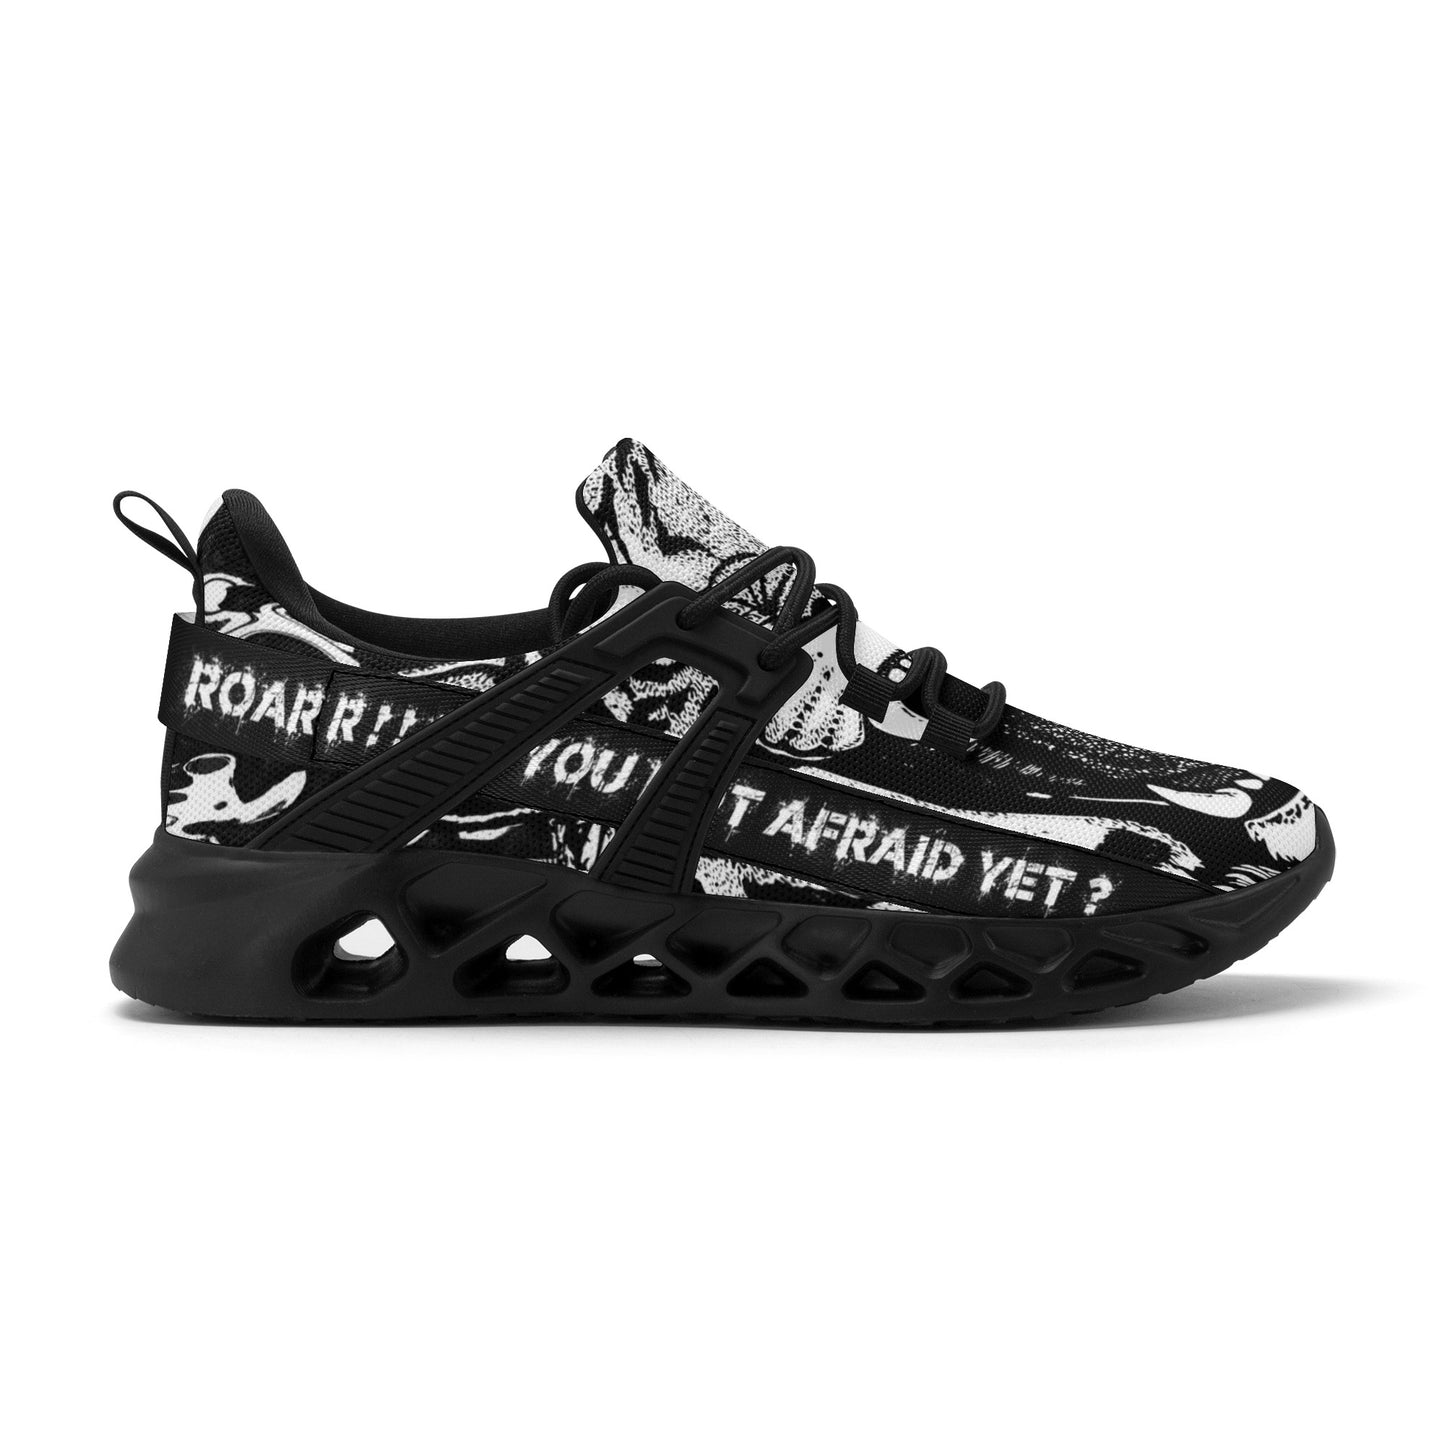 Roaring Like You Are Not Afraid Running Shoes For Men to Stay on Track and Motivated